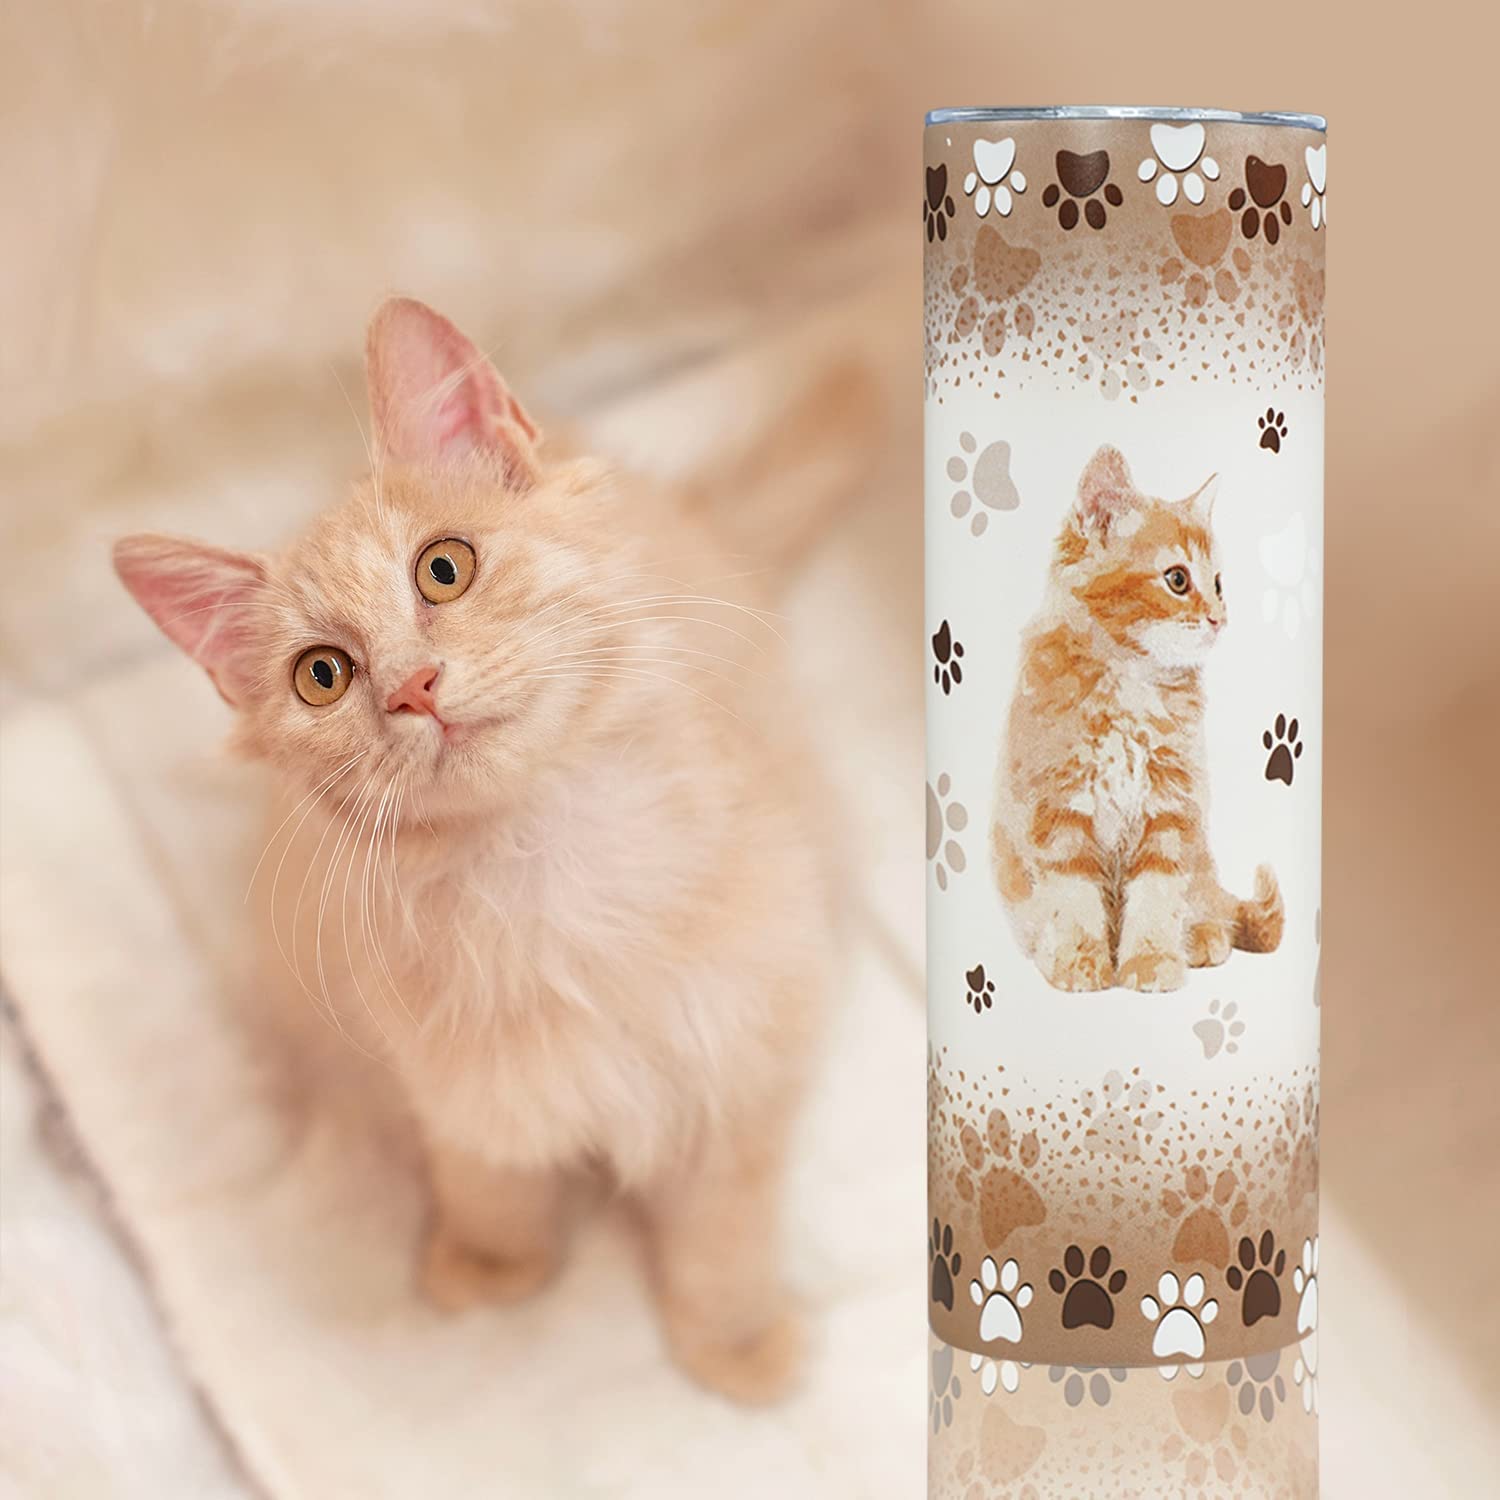 Cat Tumbler, Funny Cat Gifts for Cat Lovers, Cat Travel Mug/Coffee